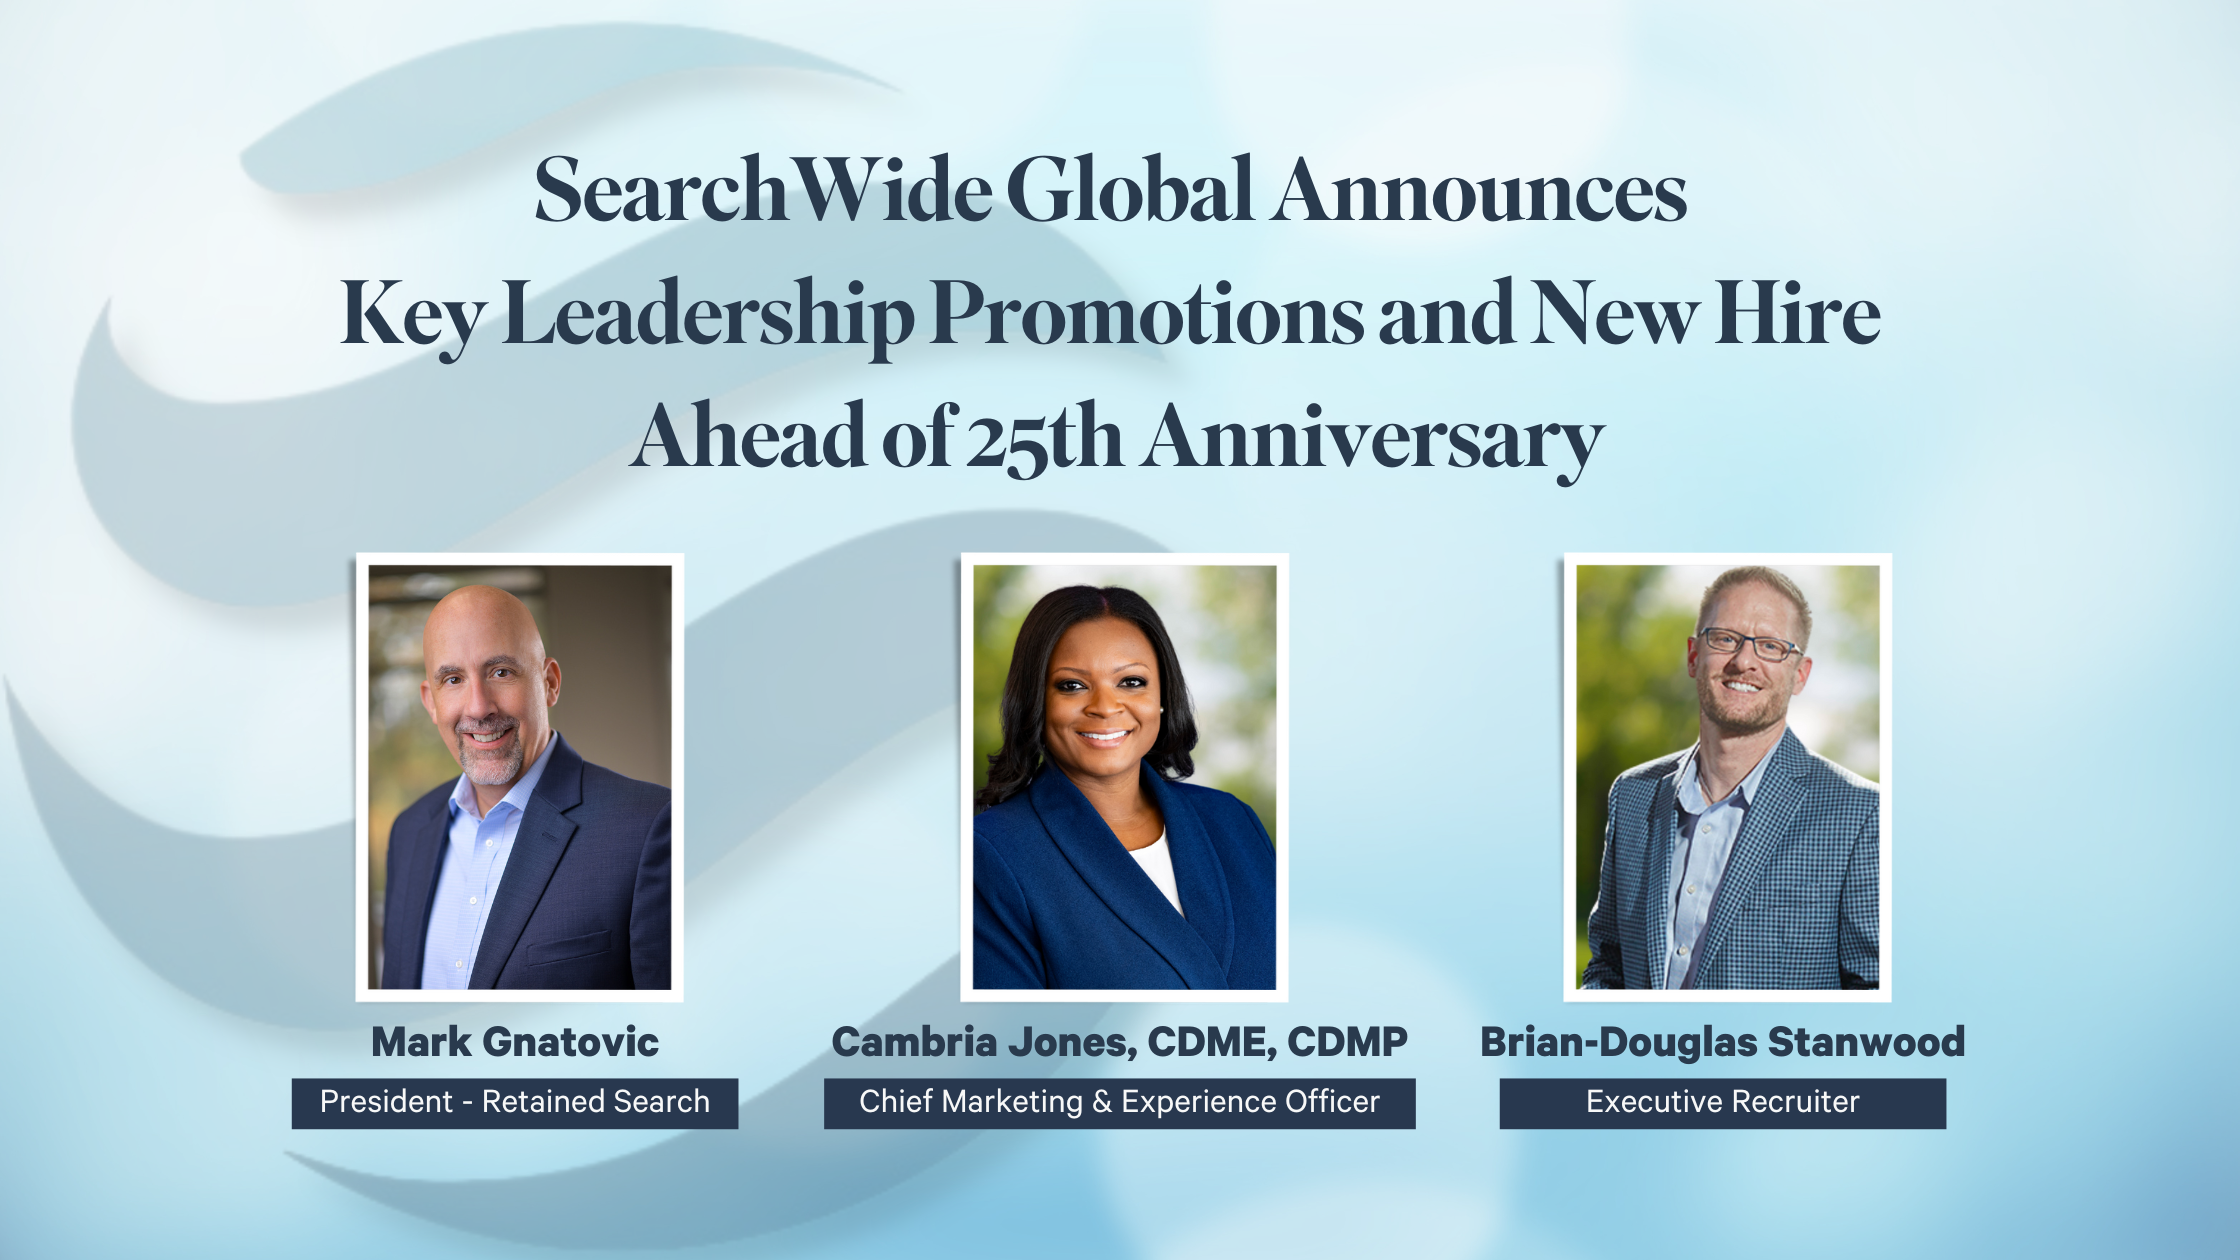 SearchWide Global Announces Key Leadership Promotions and New Hire Ahead of 25th Anniversary